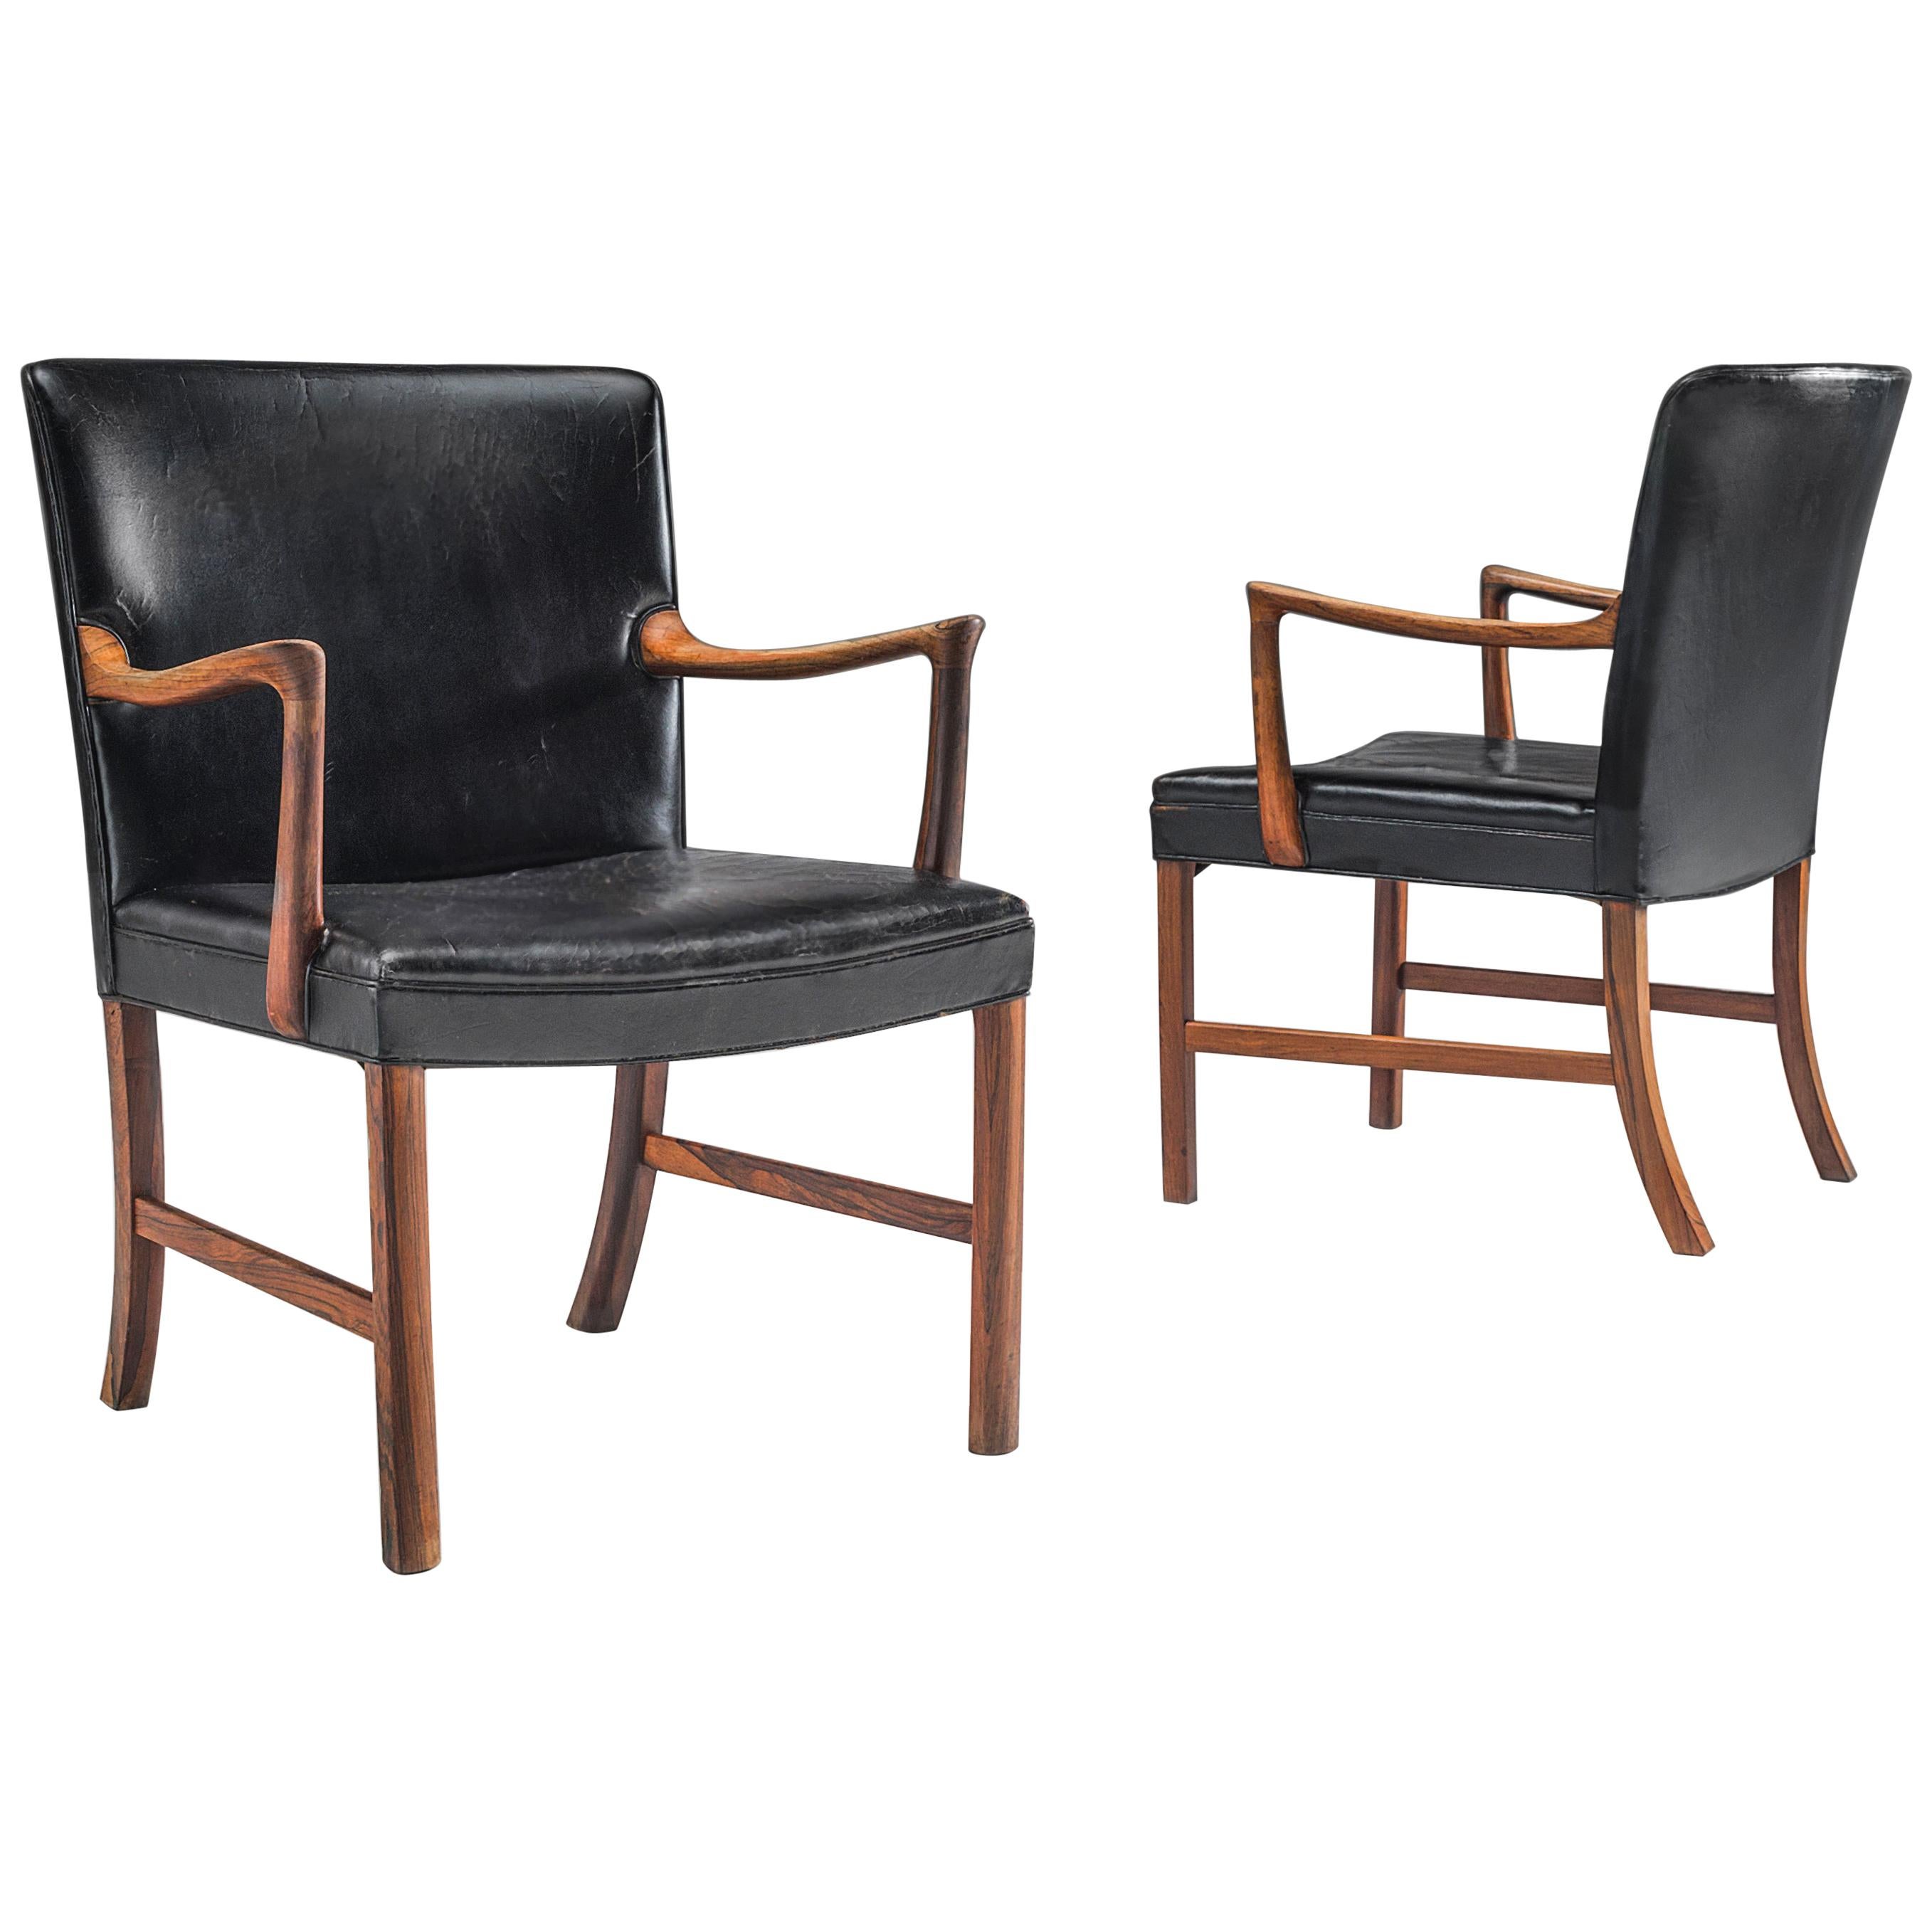 Ole Wanscher Pair of Armchairs in Black Leather and Rosewood